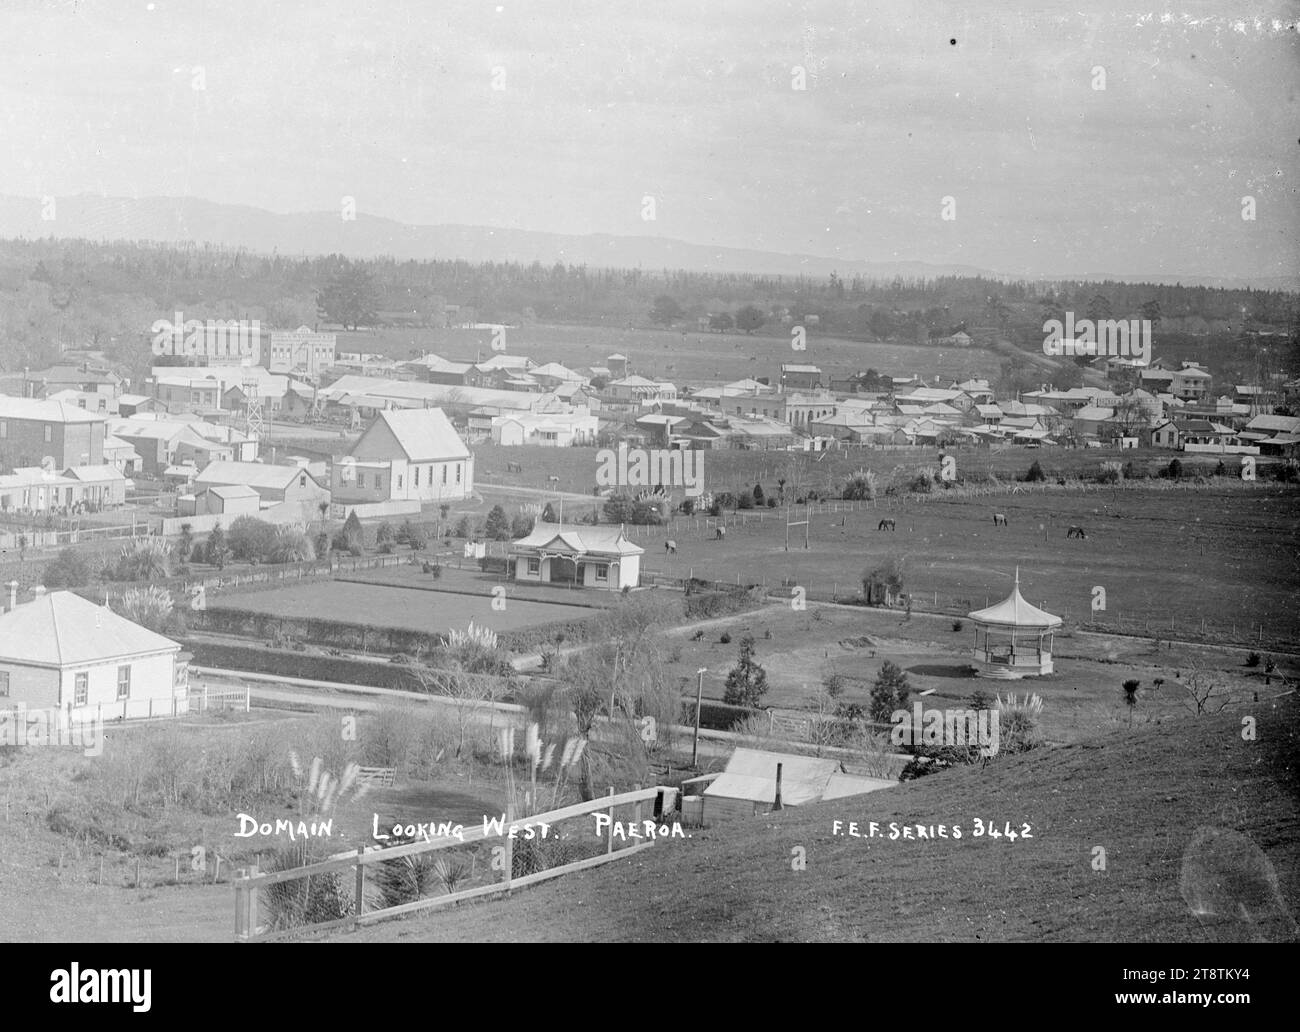 Paeroa Domain, looking West, ca 1918 - Photograph taken by Fred. E Flatt, View over the Paeroa Domain, looking West. Photograph taken by F.E.F. (probably Fred E Flatt, stationer, at Paeroa in 1918). There is a bandstand in the right foreground, with a bowling club and bowling green to the left of the band rotunda. The township is beyond, with the business premises of James McAndrew, timber merchants, in the left background Stock Photo